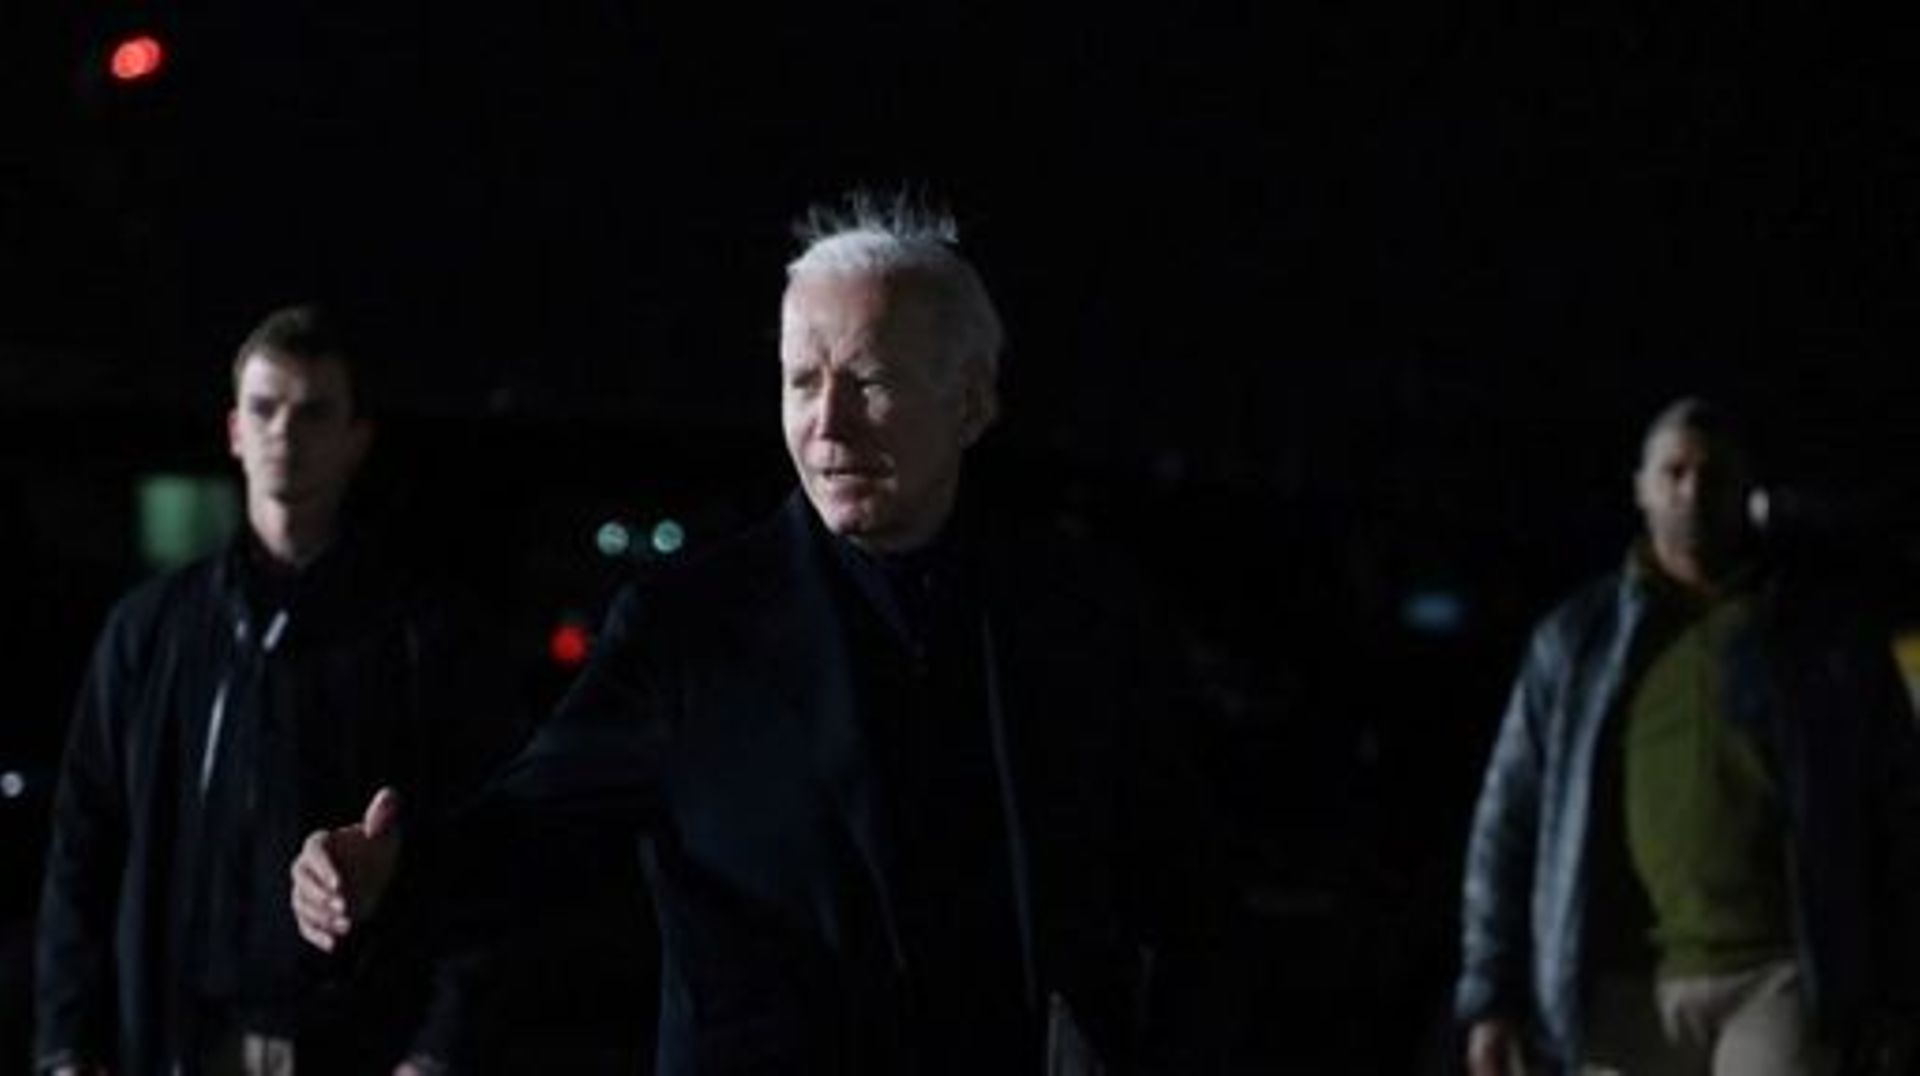 US President Joe Biden arrives to board Air Force One at Delaware Air National Guard Base in New Castle, Delaware, on their way back to Washington, DC, after spending the weekend in Wilmington on March12, 2023. ROBERTO SCHMIDT / AFP